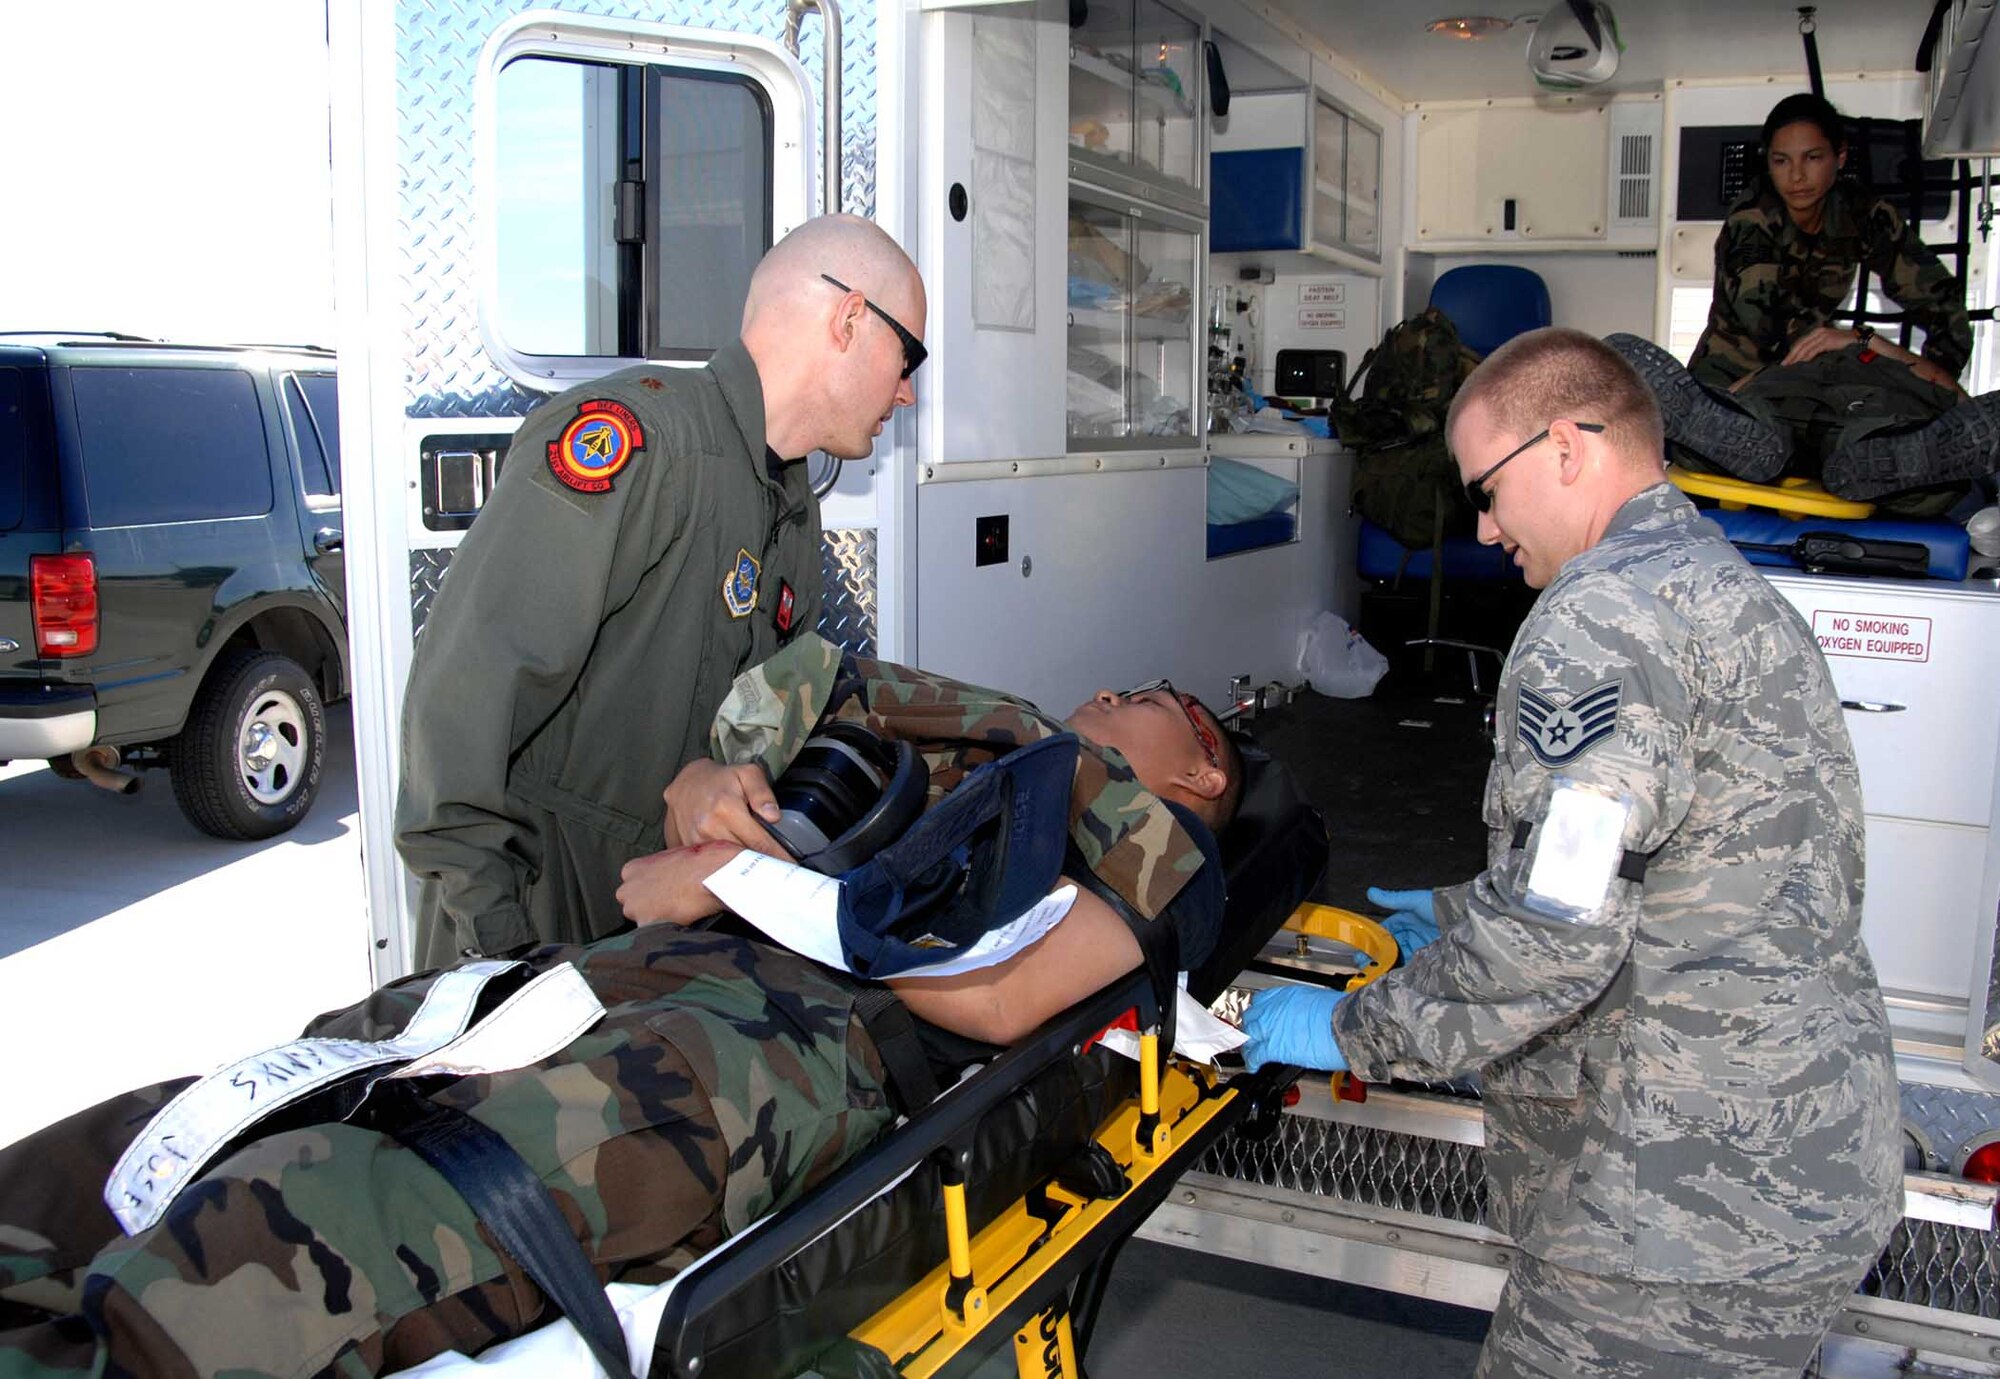 Maj. Christopher Bird, (left), 60th Aerospace Medicine Squadron flight surgeon and Staff Sgt. Mathias Blitz, lift Airman 1st Class Emmanuel Jose, 860th Aircraft Maintenance Squadron into an ambulance for treatment. The simulation was part of the Home Station Attack Response Exercise that tested the capabilities of Team Travis and the Solano County community in the event of an attack. (U.S. Air Force photo)